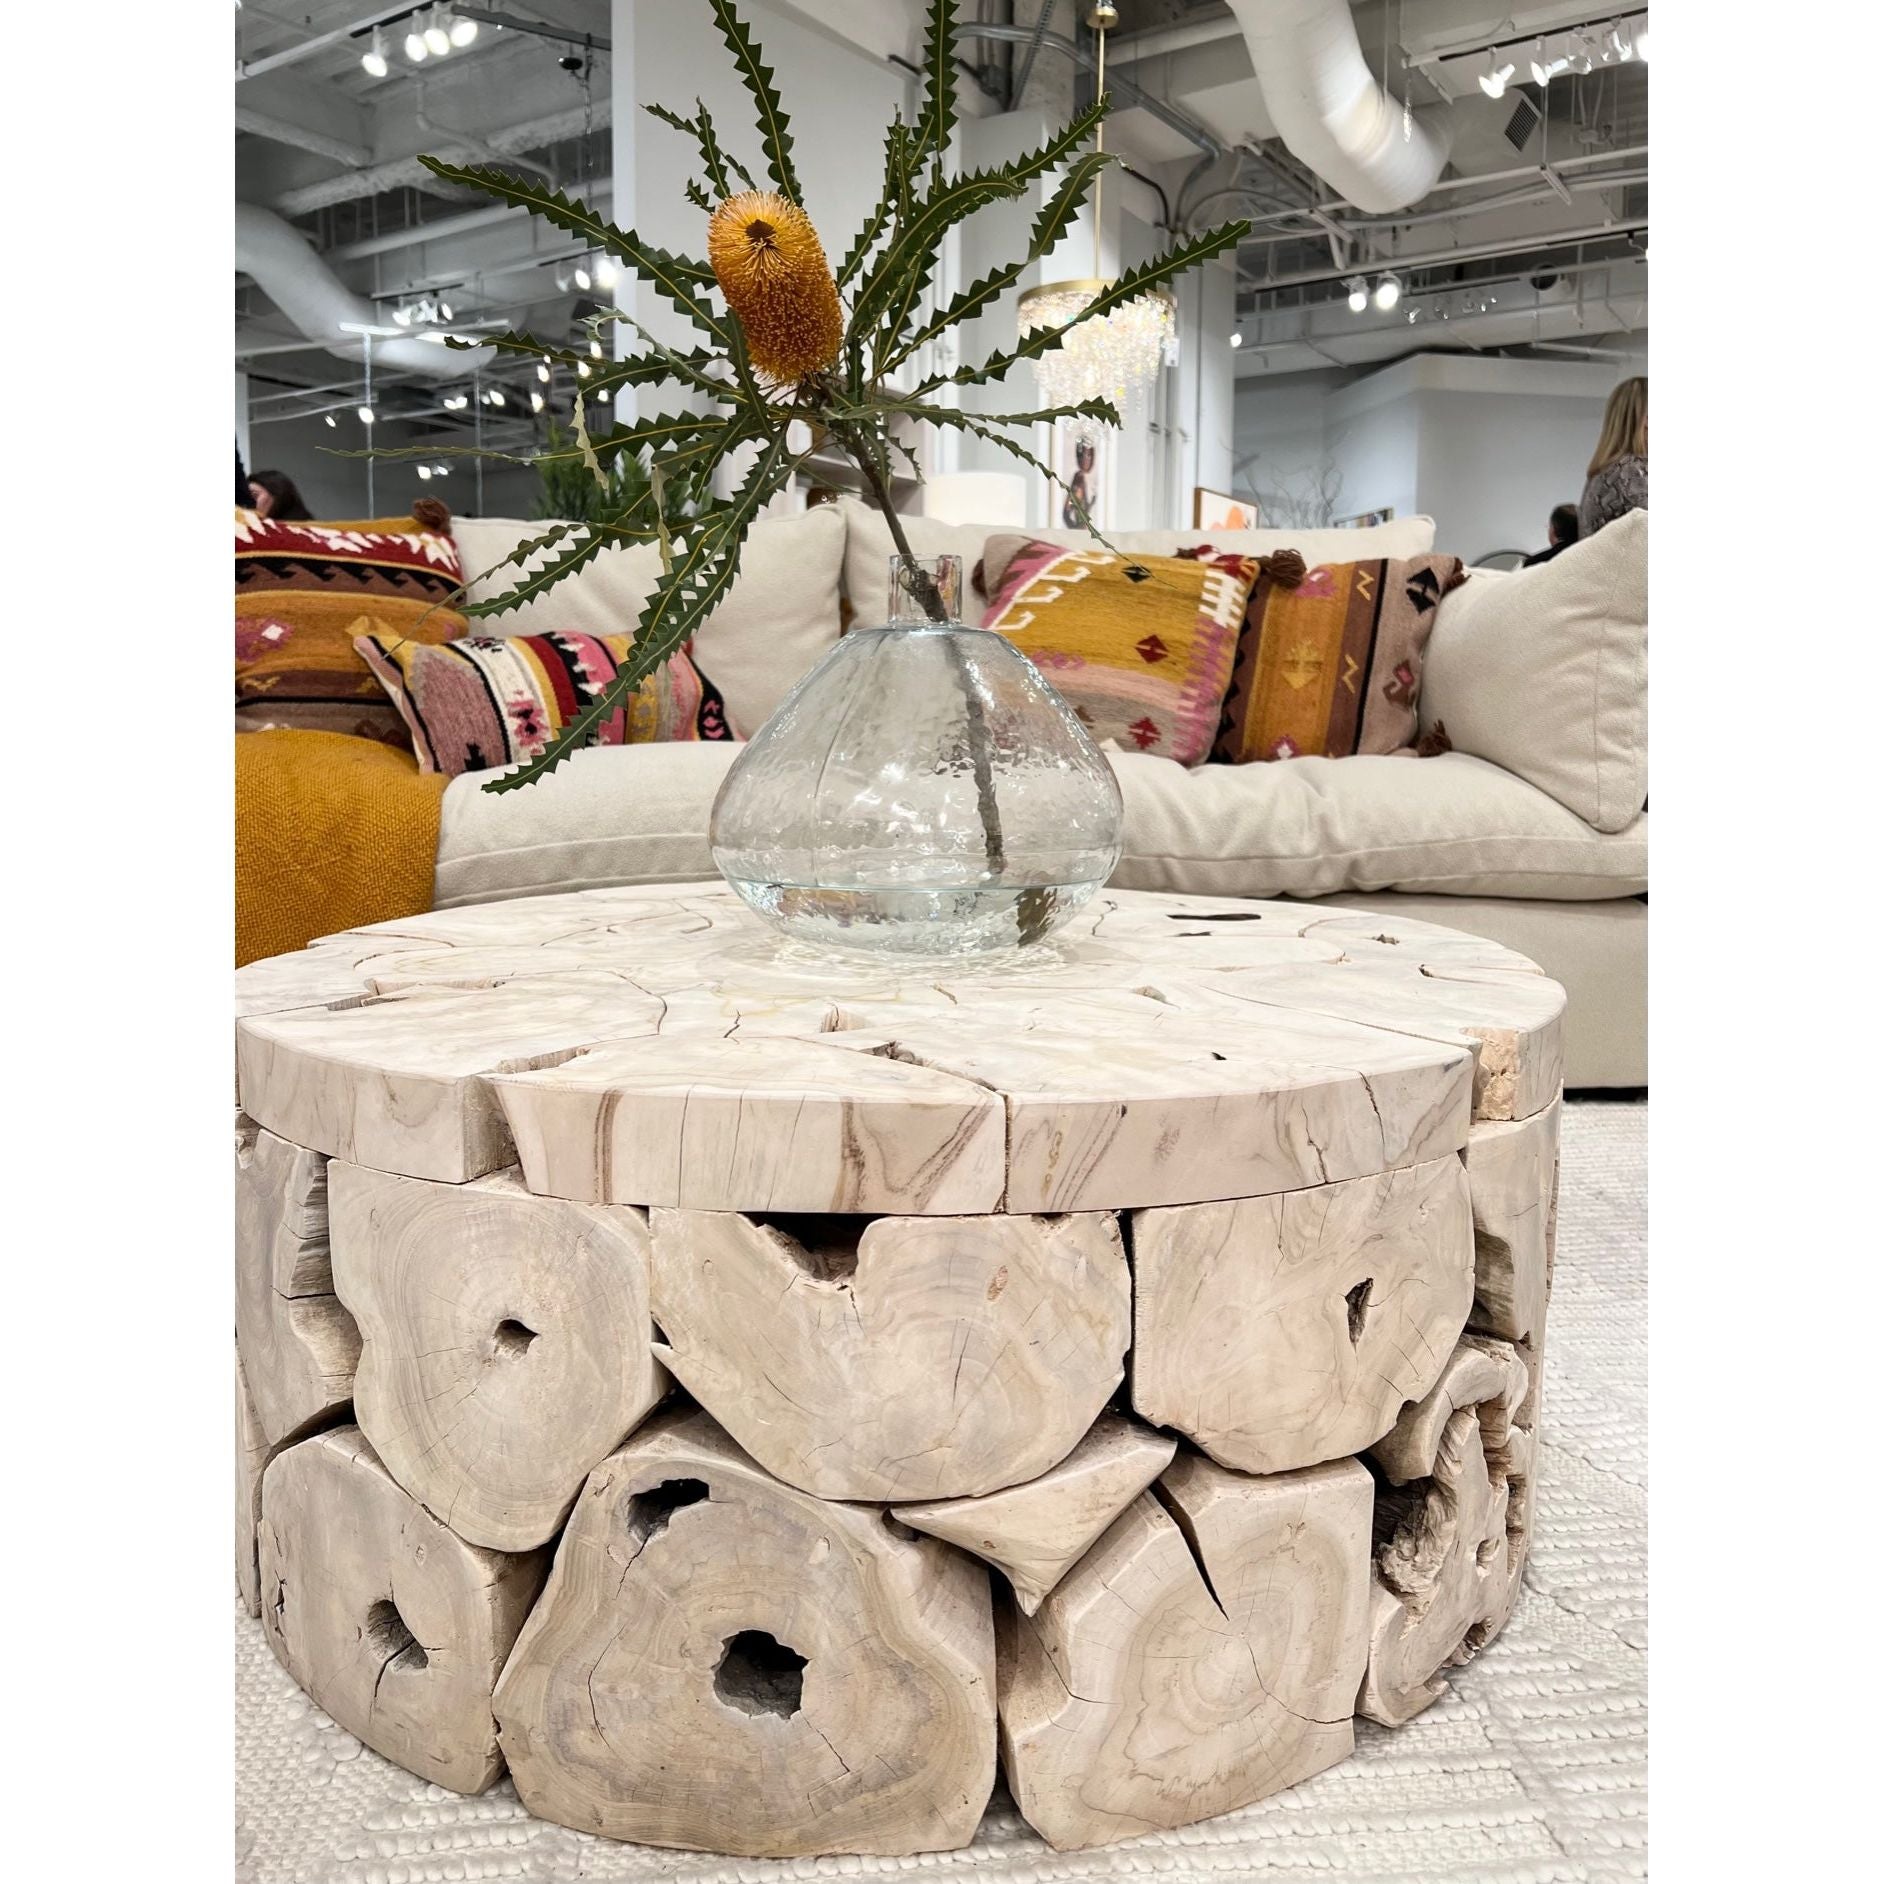 This beautiful Briar Round Coffee Table is pieced together from reclaimed slabs and chunks of solid teak wood finished in a bleached finish with exquisite craftsmanship. Artisans build each coffee table like a puzzle, fitting each piece together in combinations that are never duplicated. Like true works of art, no two will be exactly alike. Amethyst Home provides interior design services, furniture, rugs, and lighting in the Dallas metro area.